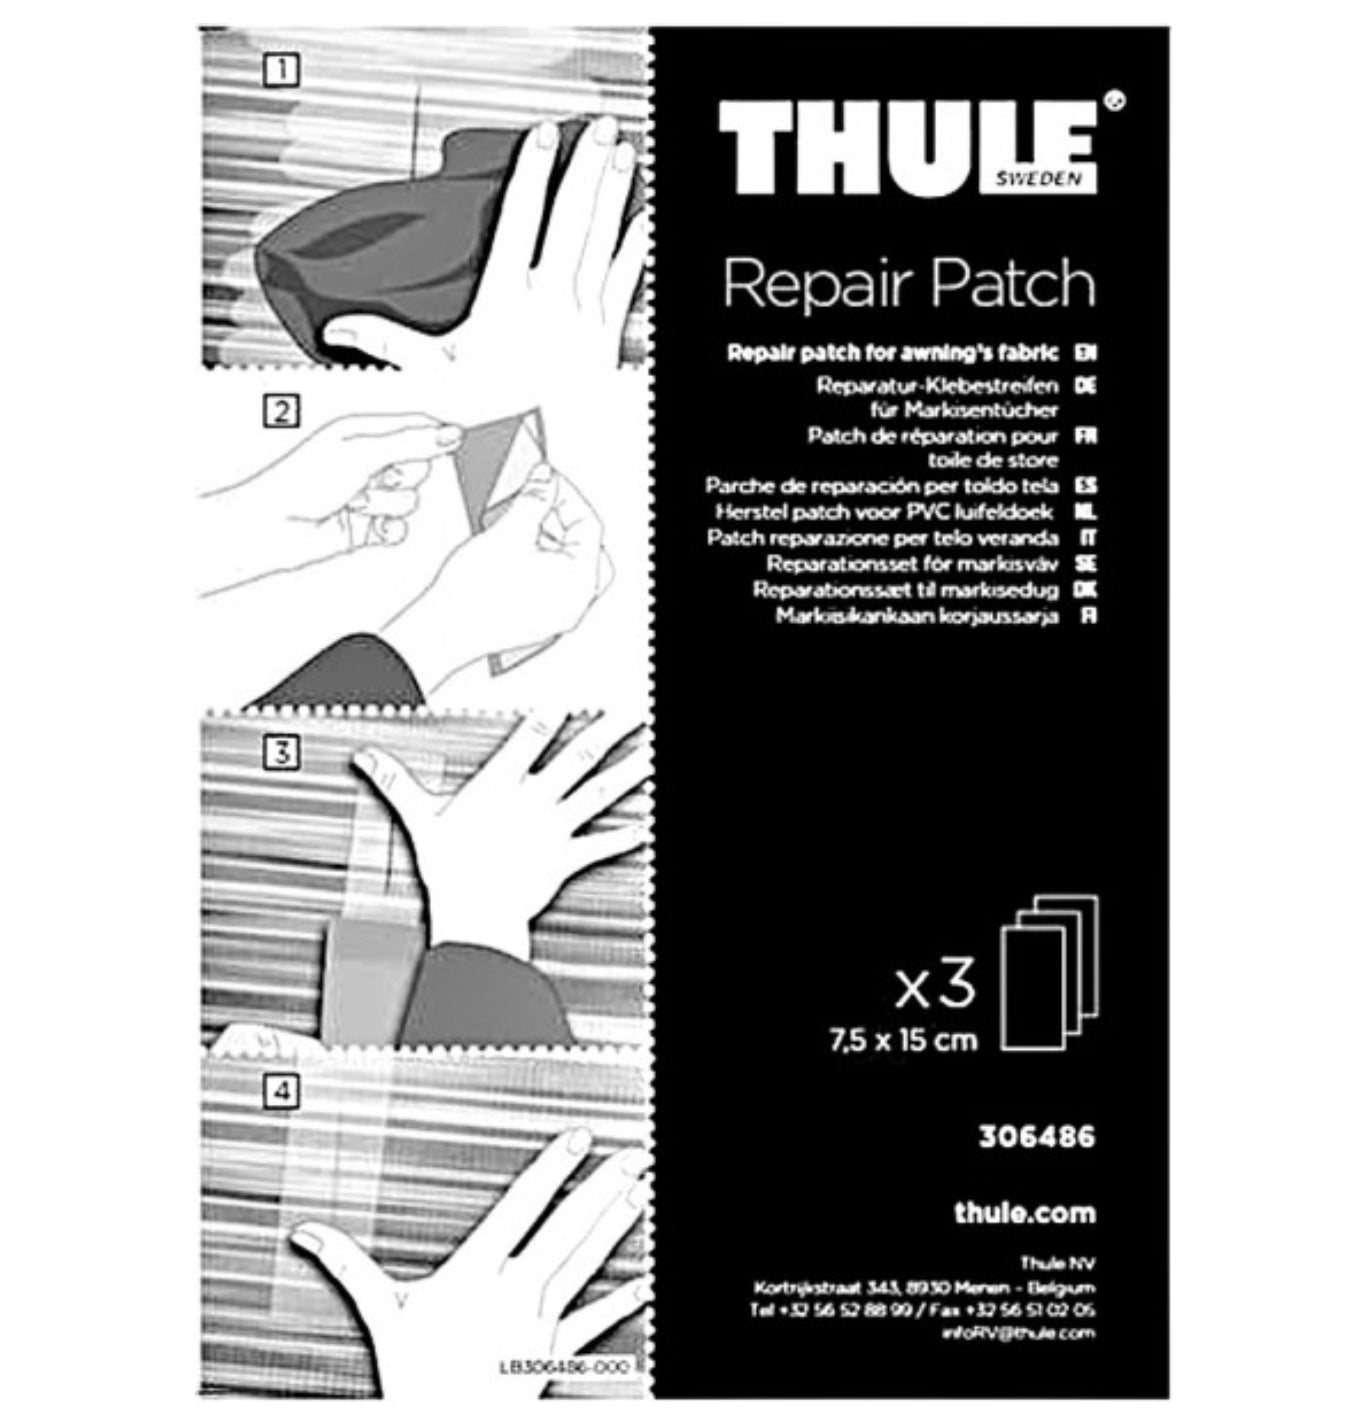 Thule Omnistor Awning Repair Patch Kit | 306486